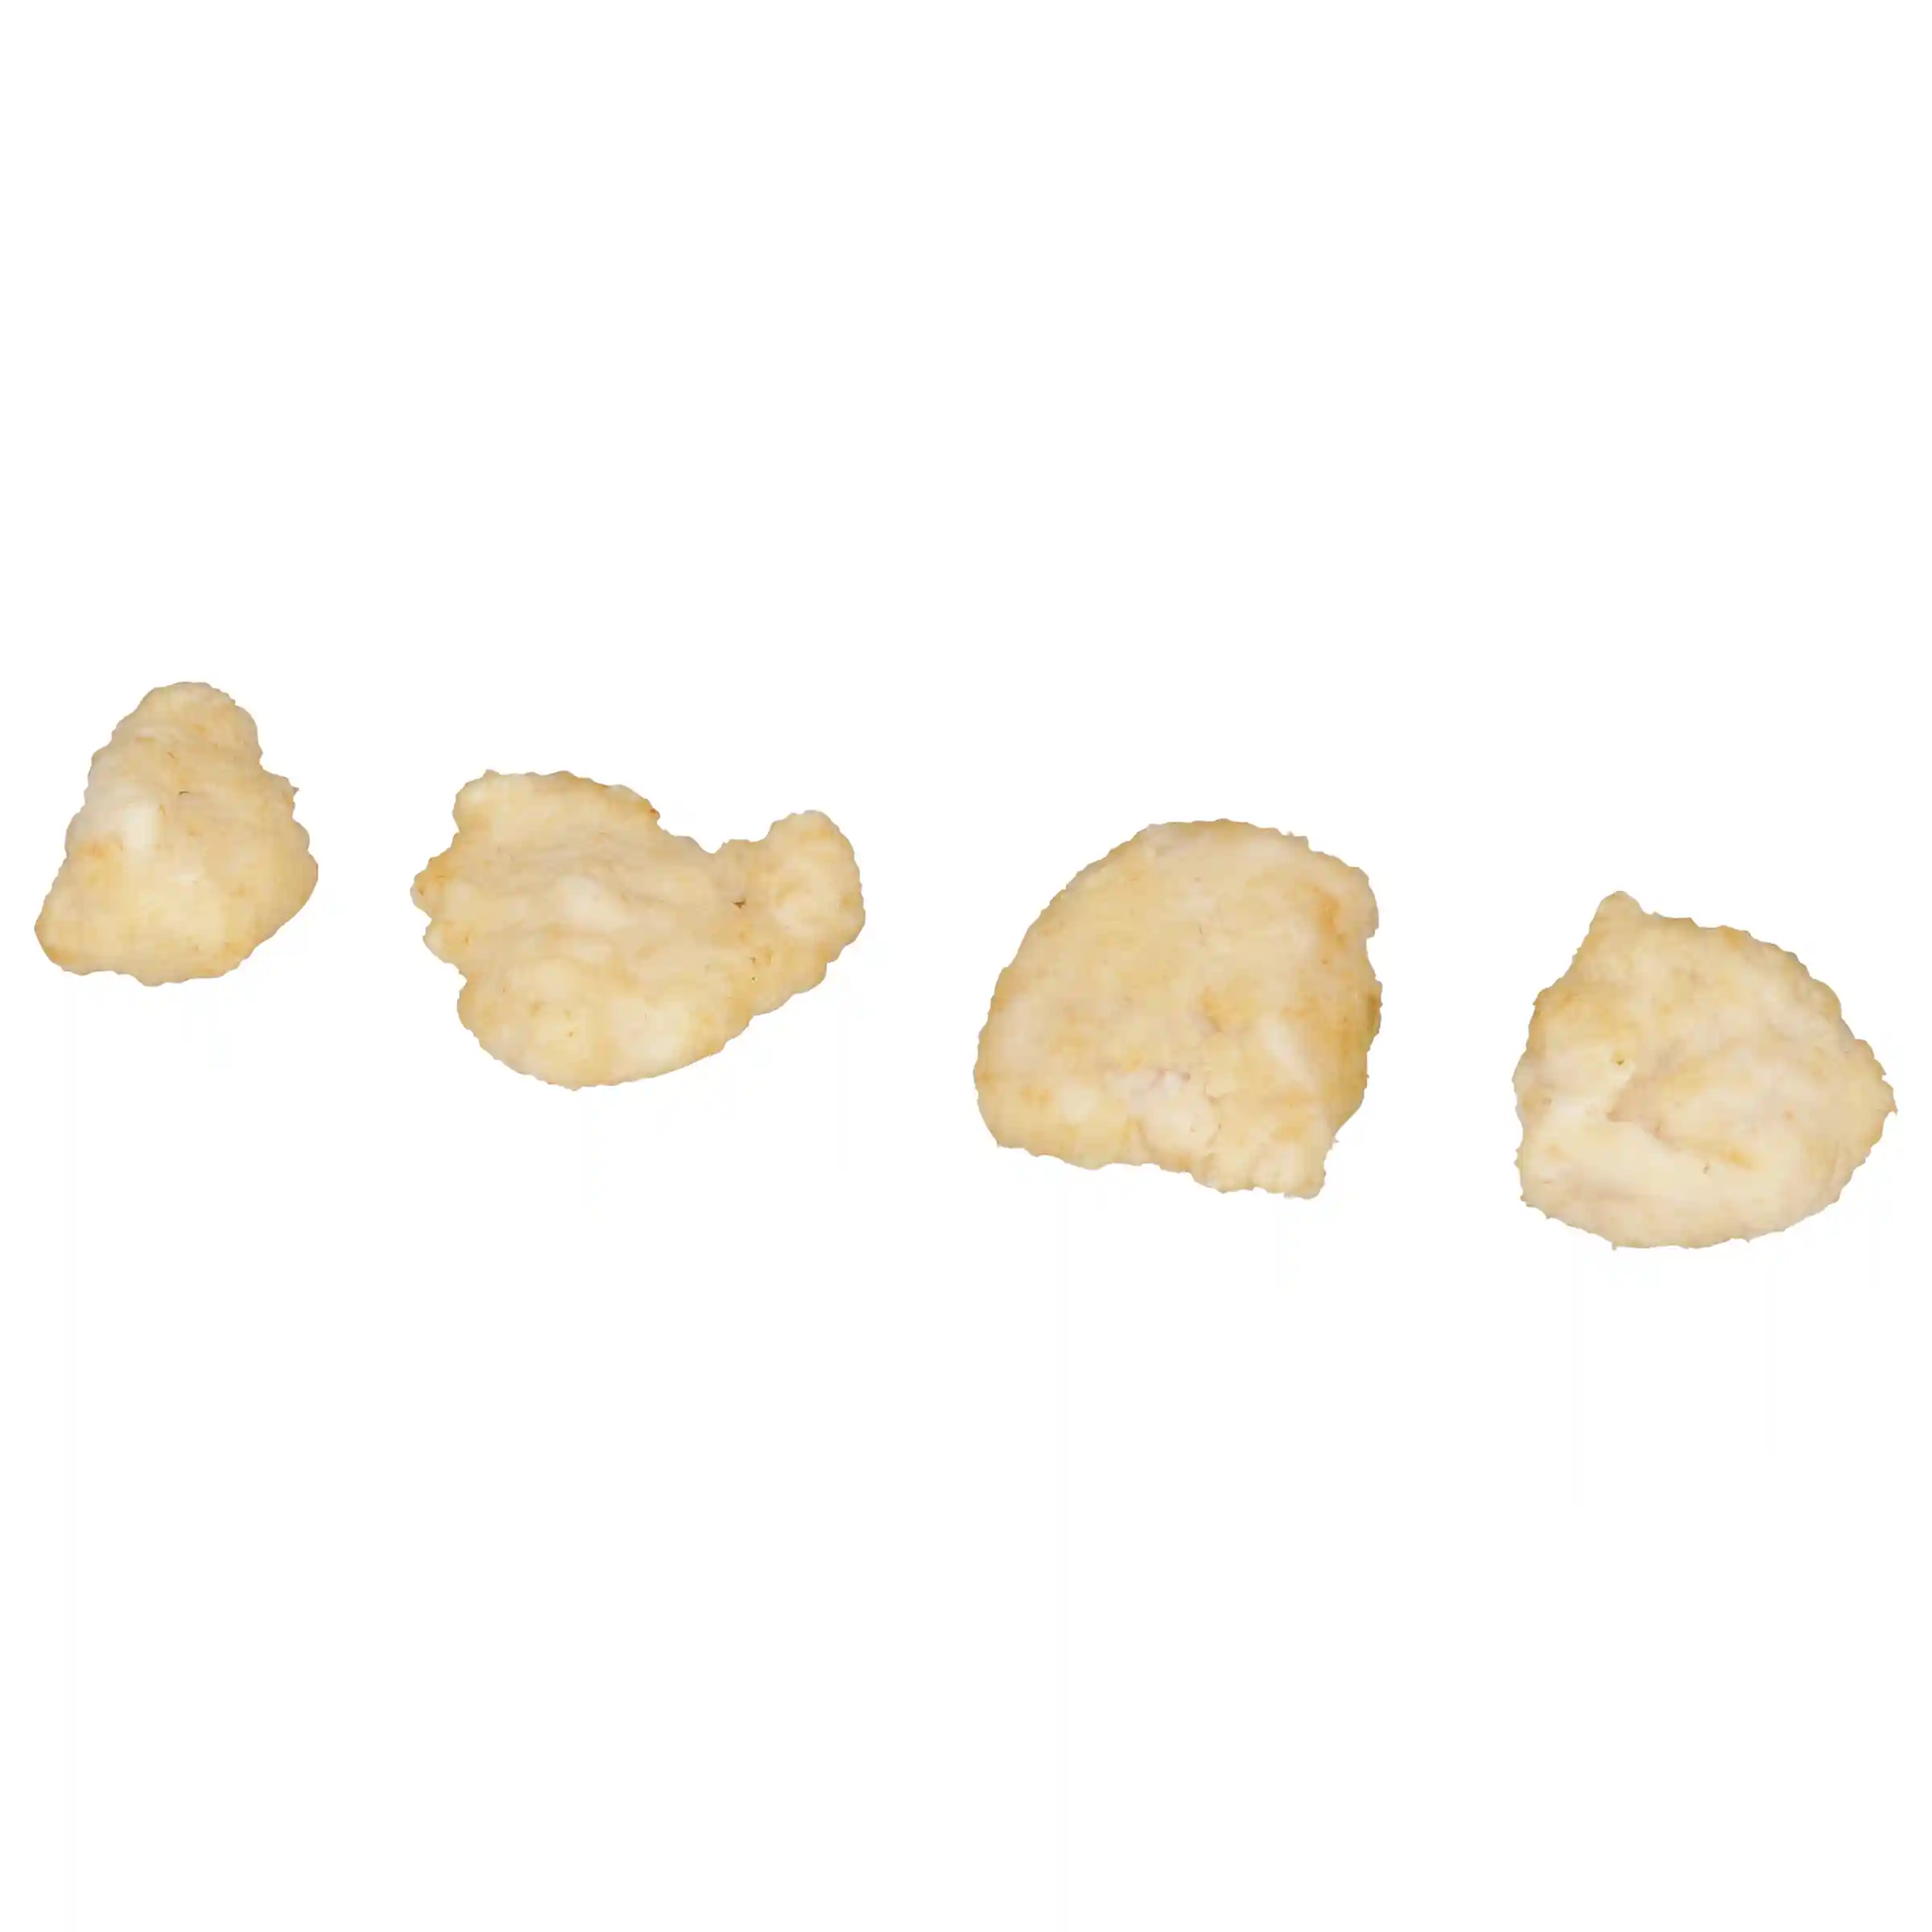 Tyson® Uncooked Battered Boneless Skinless Cubed Chicken Breast Fritters_image_01